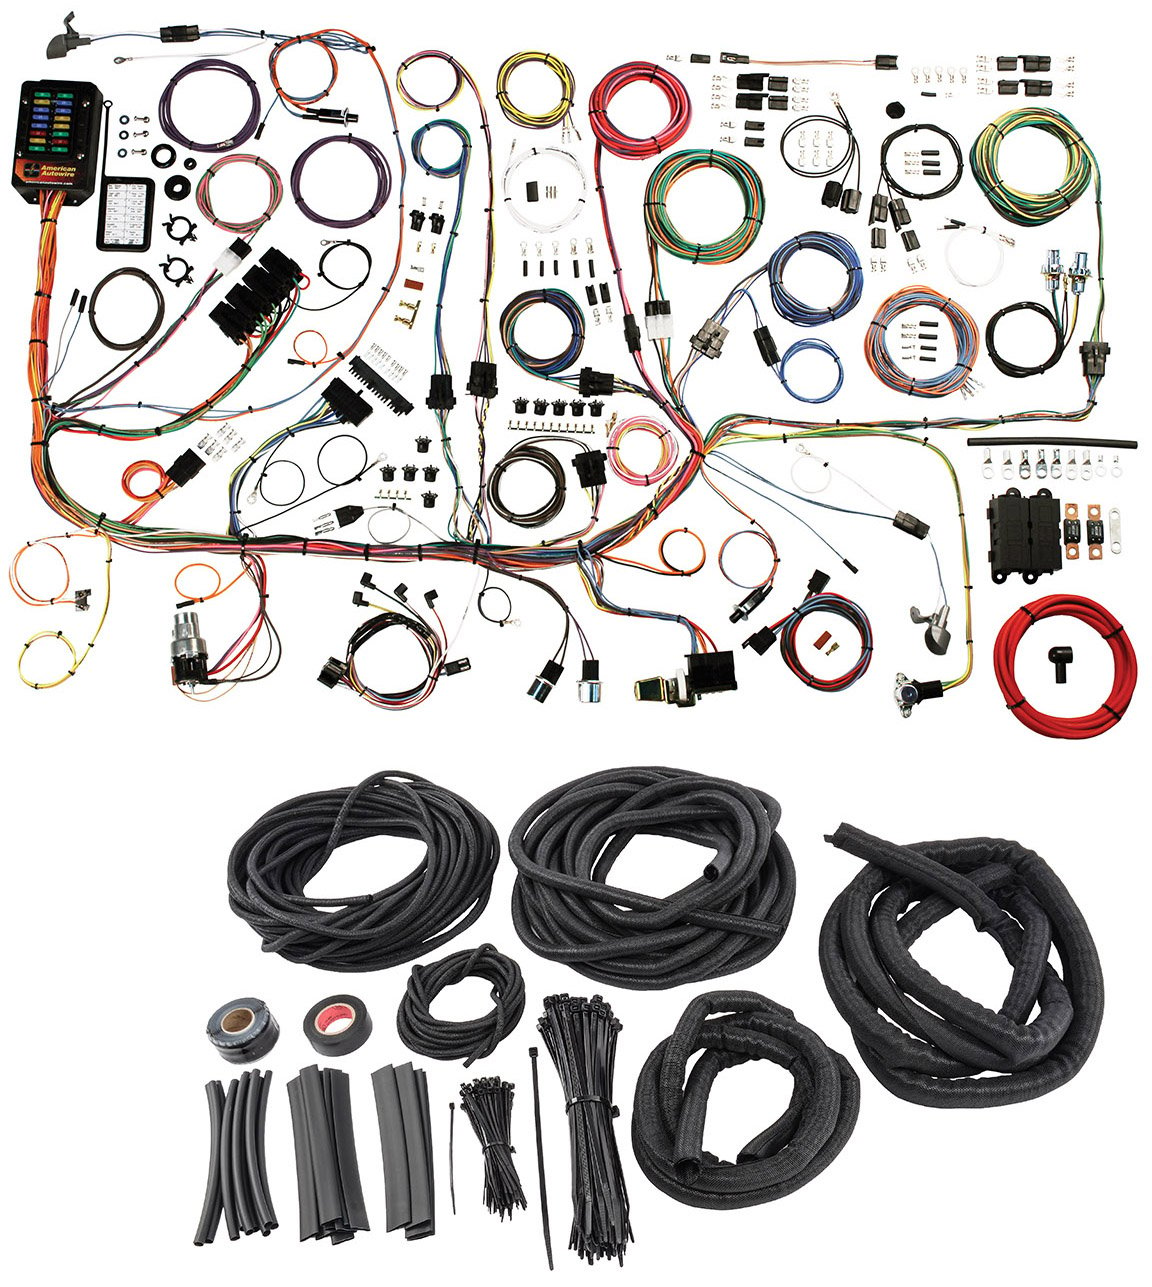 Harness & Braid Cover Kit for 1967-1968 Ford